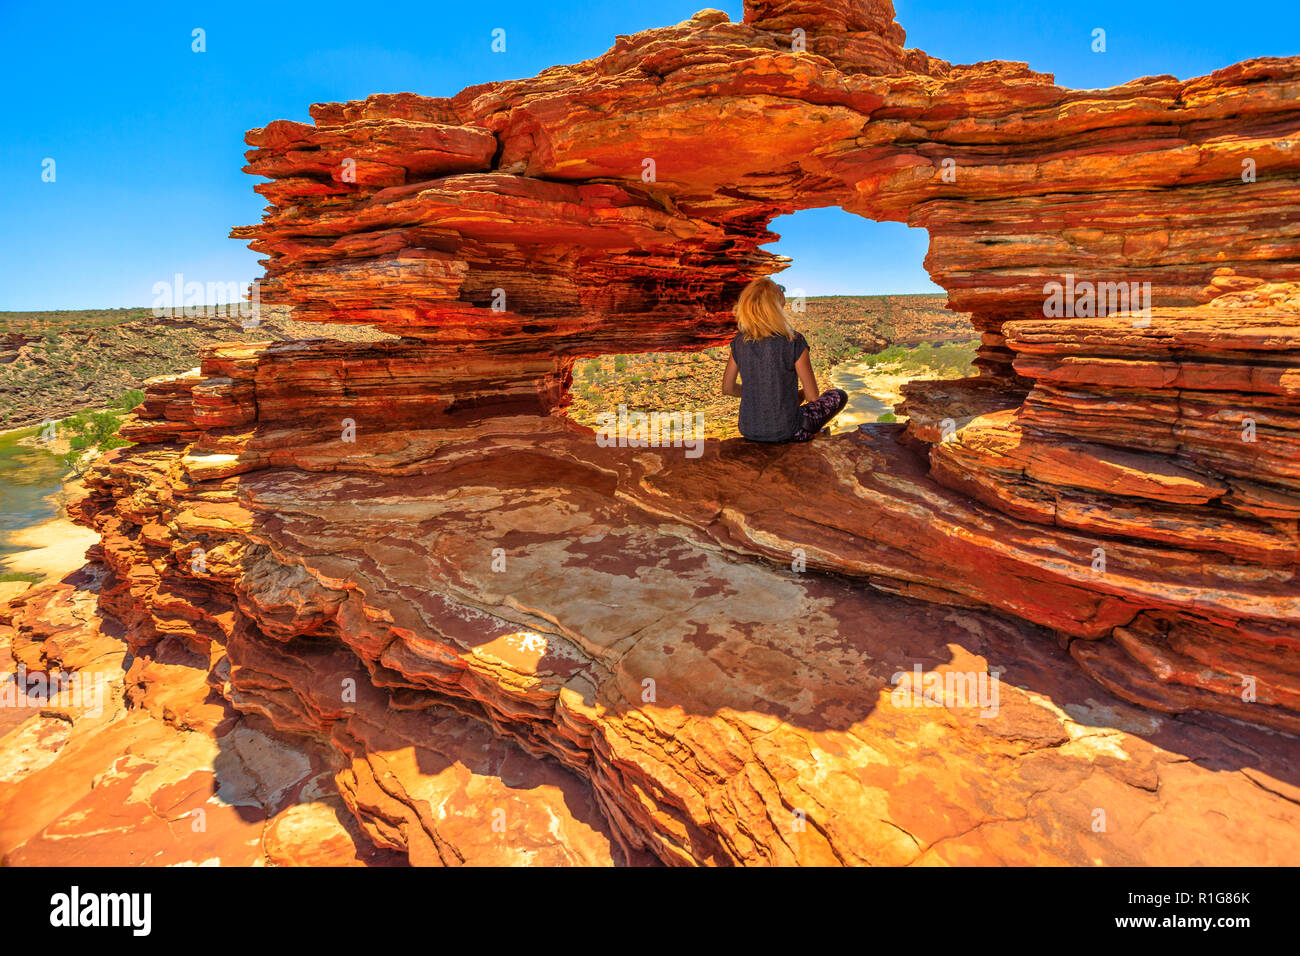 Blonde caucasian woman sitting inside the iconic rock arch in red sandstone of Nature's Window, Kalbarri National Park. Caucasian young girl in Western Australia looking australian outback landscape. Stock Photo